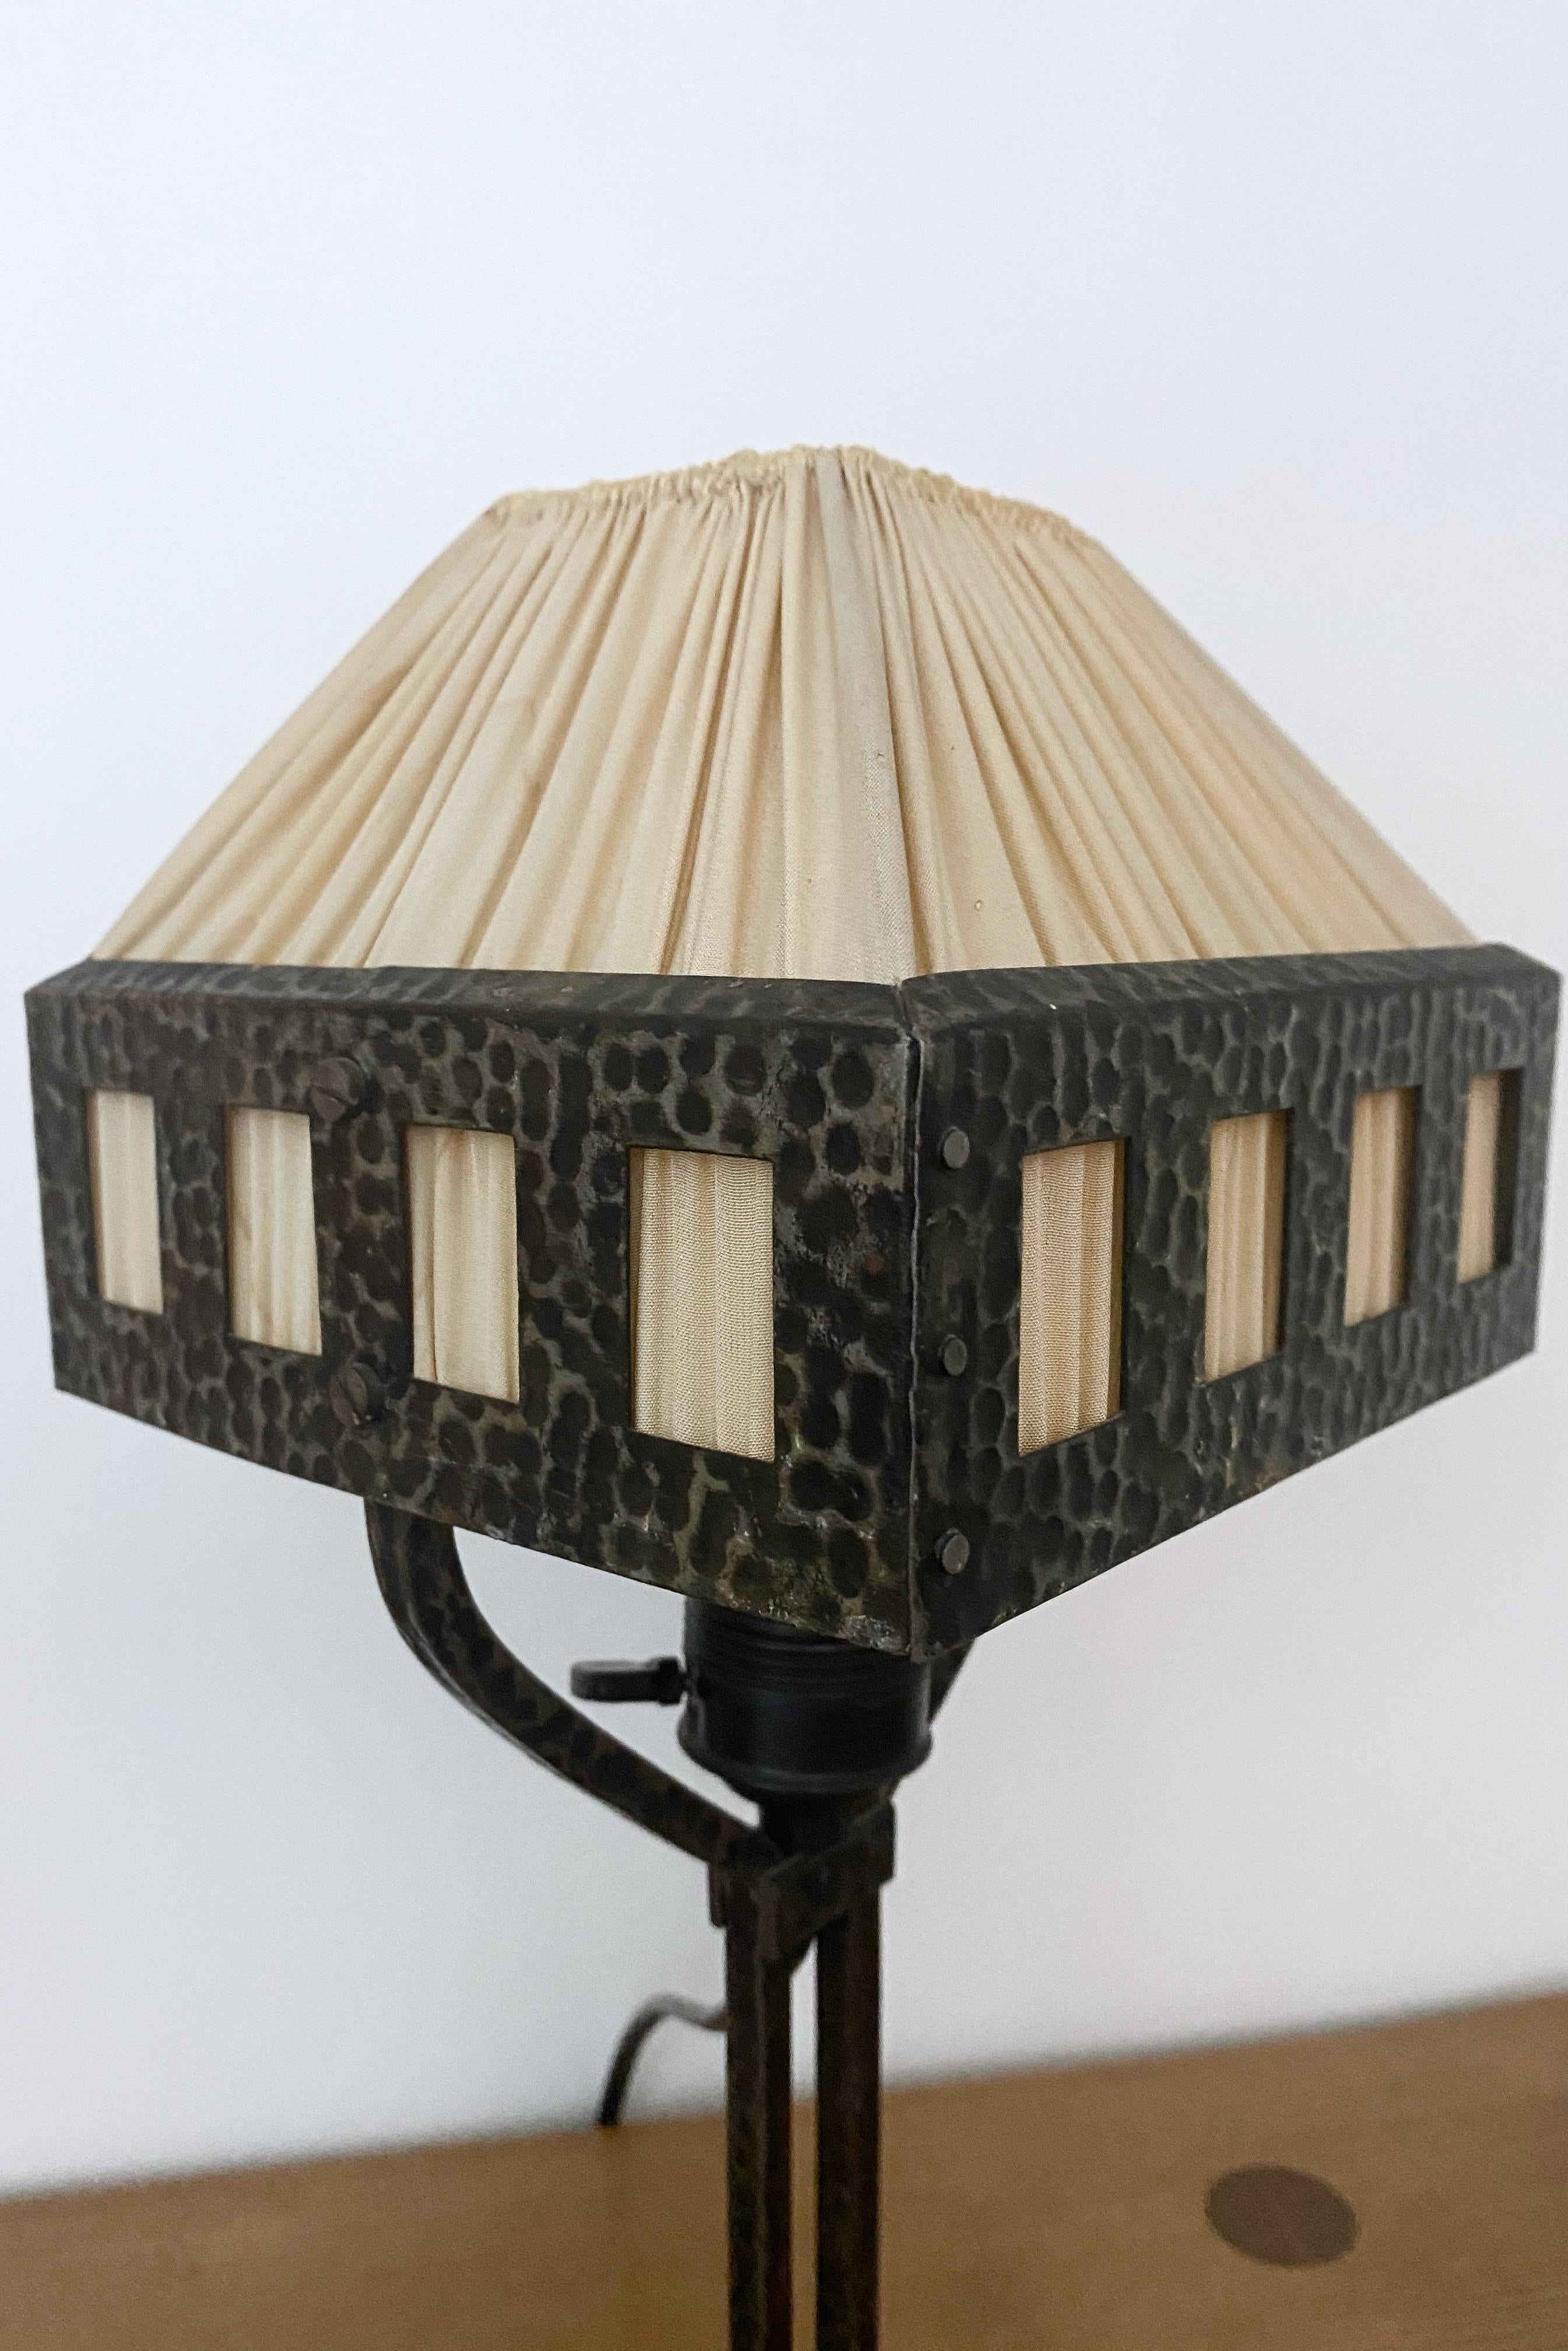 1910s Hammered copper table lamp by Arvid Böhlmarks lamp fabric in Sweden. Arts and crafts inspired design in Jugend style with original silk lampshade. Age appropriate wear to the silk but overall in a good condition. A copper header that should go